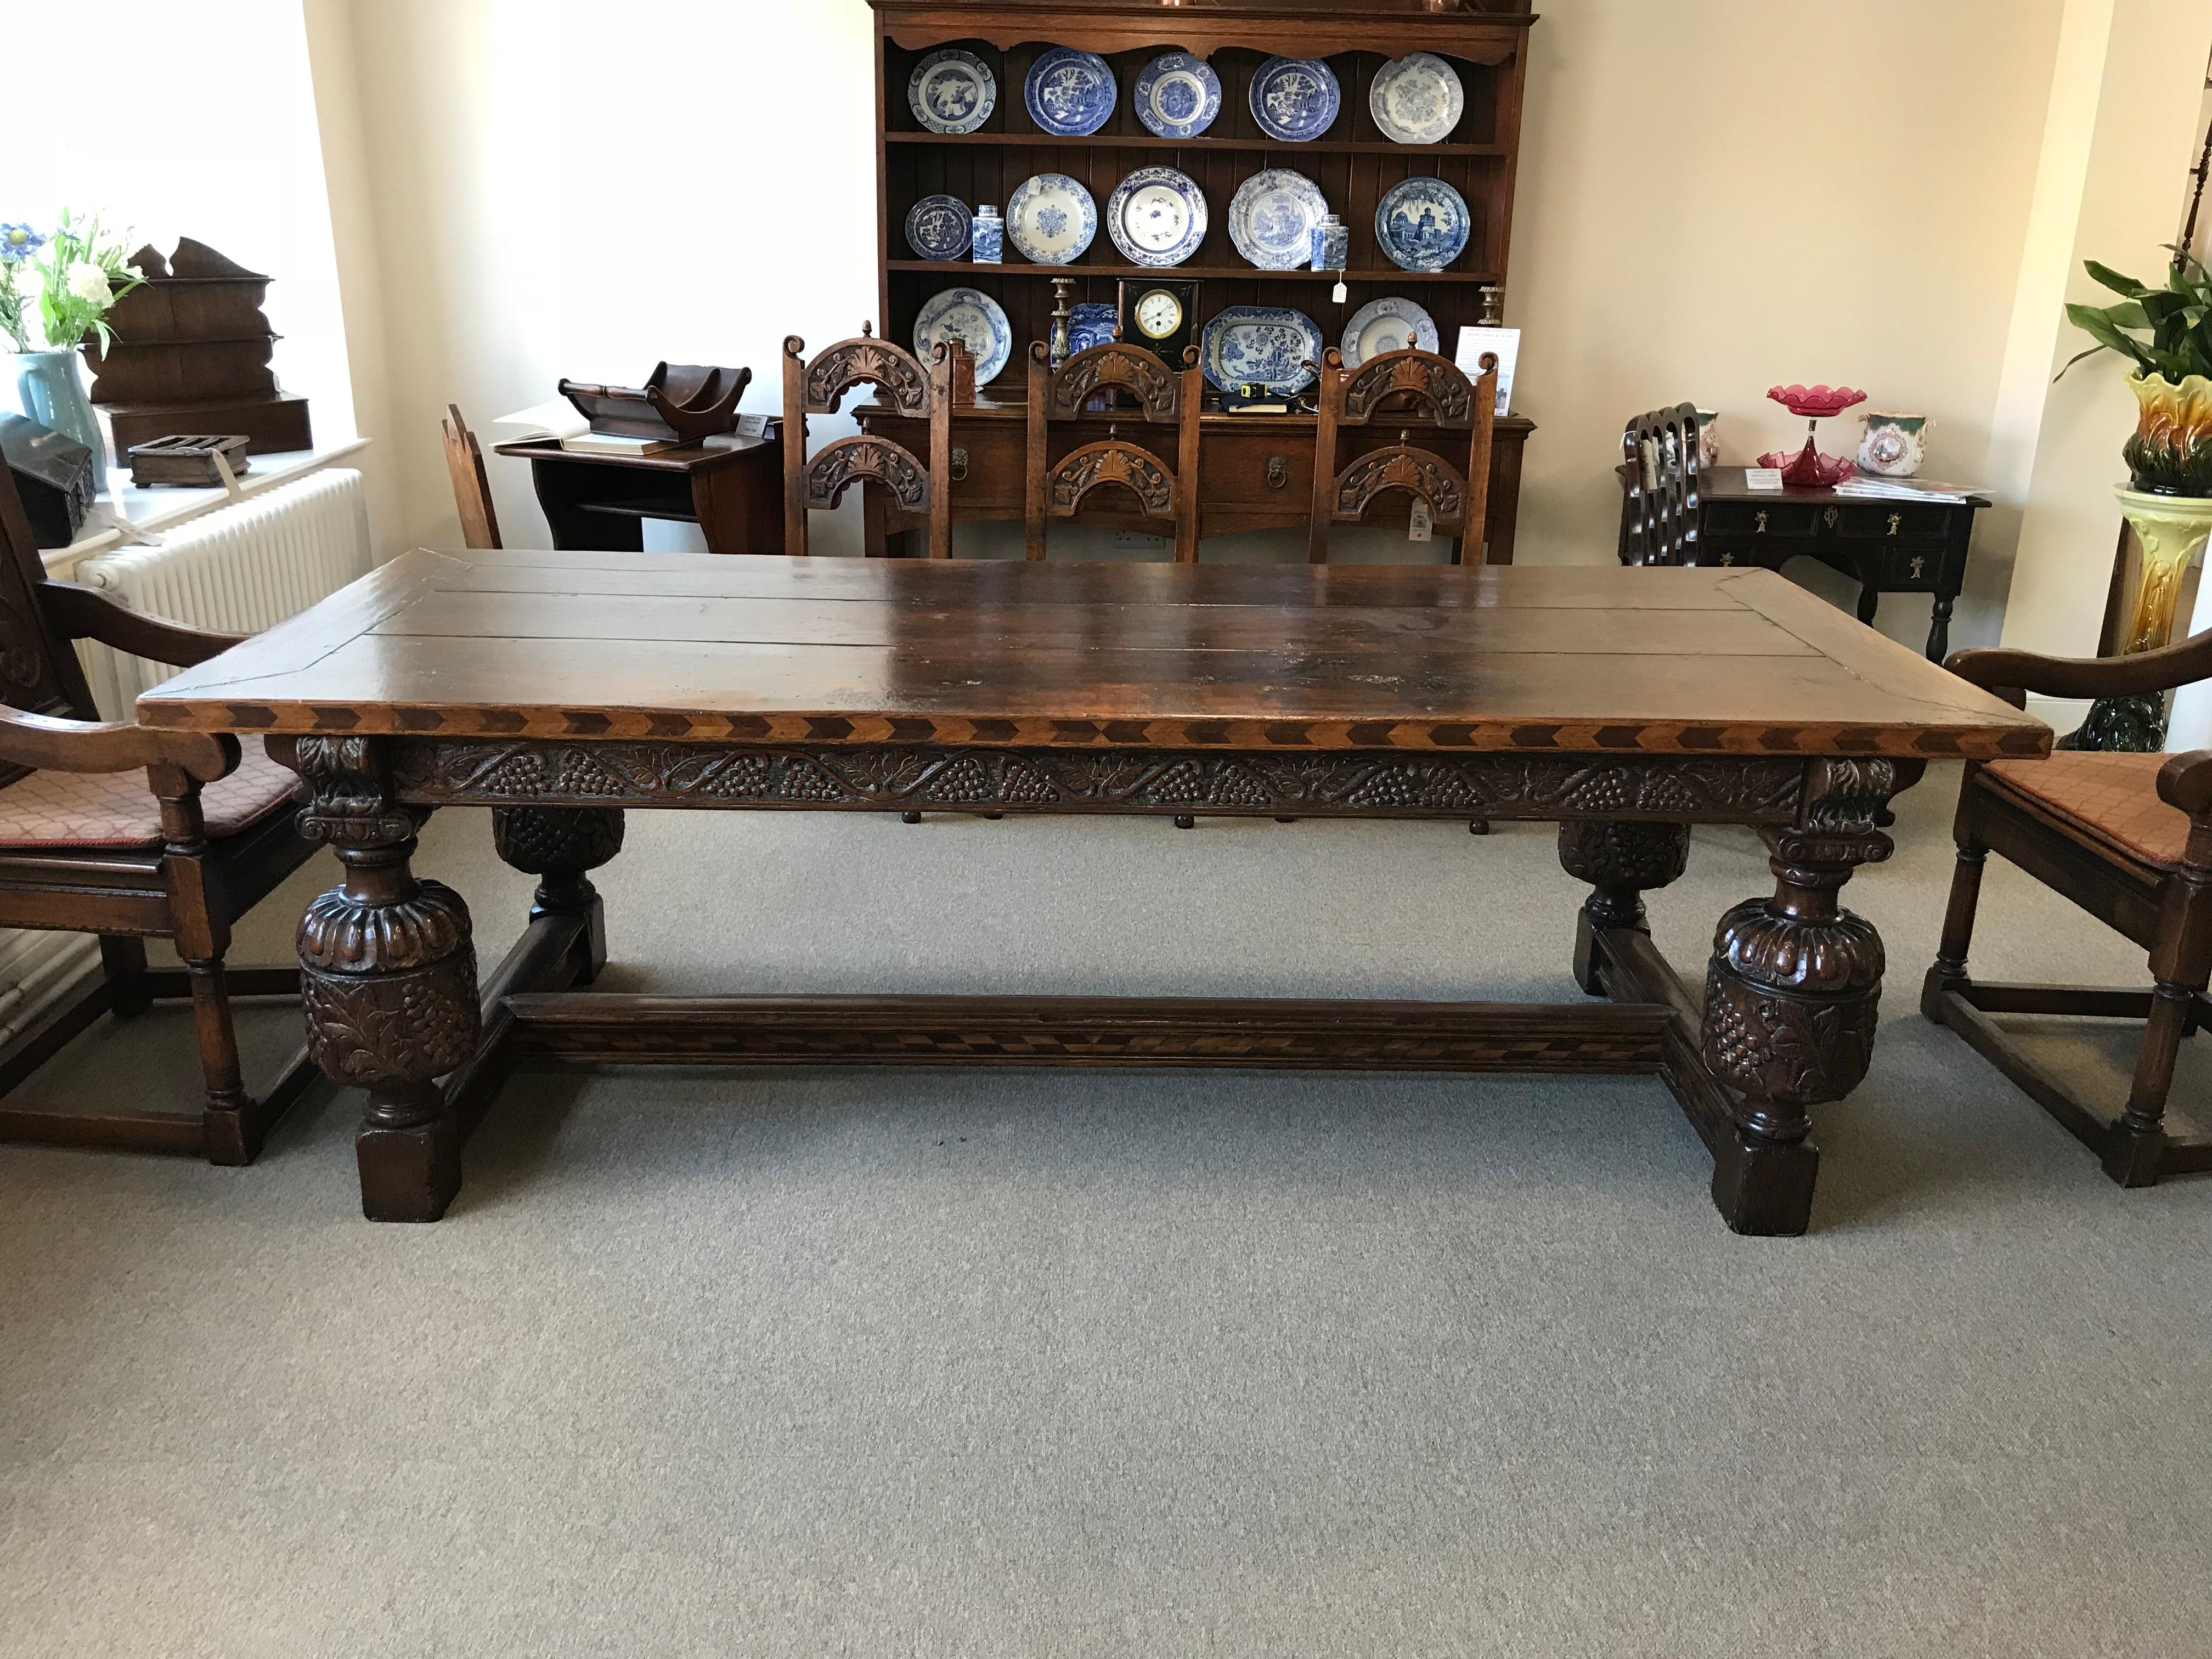 king henry table